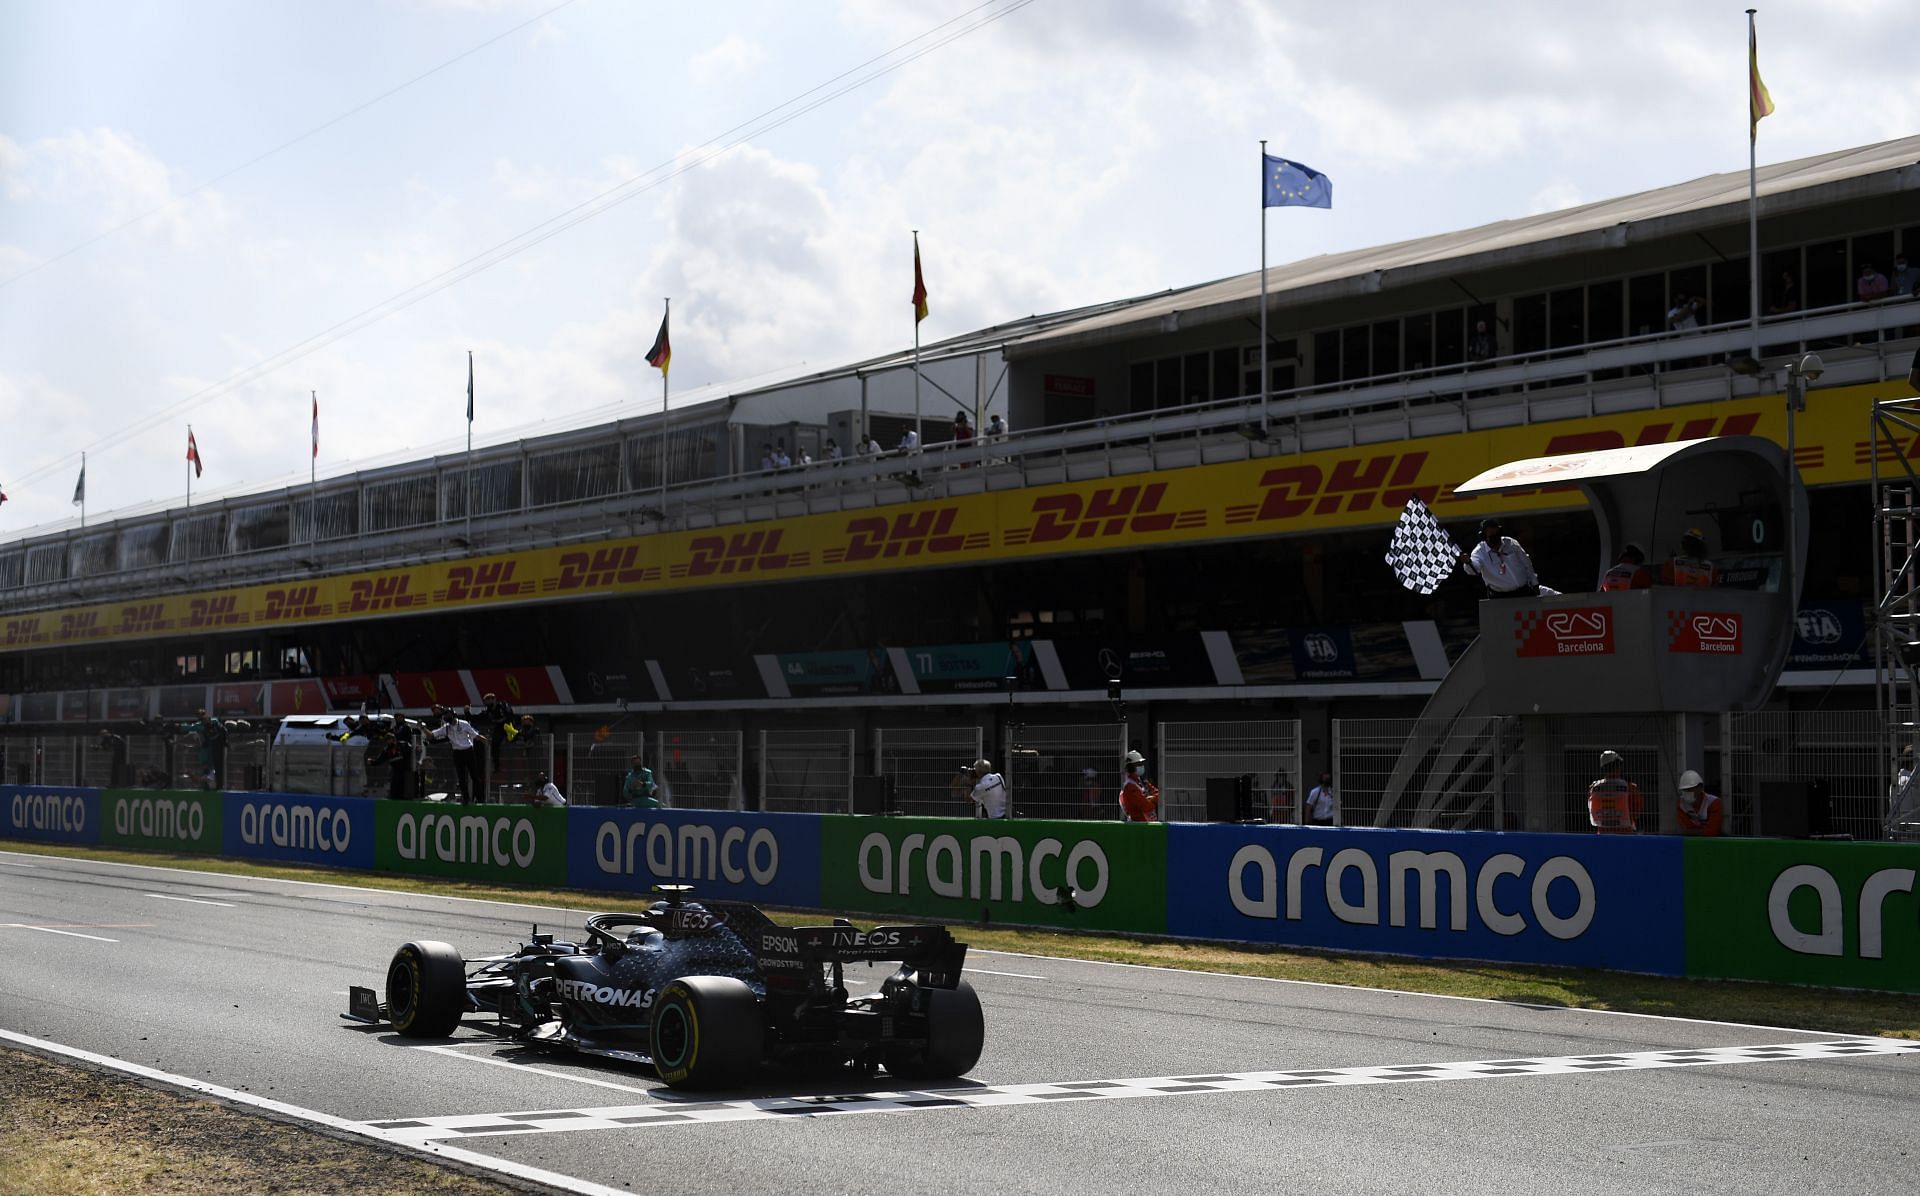 The previous iteration of the F1 Spanish GP saw Lewis Hamilton take the win (Photo by Rudy Carezzevoli/Getty Images)